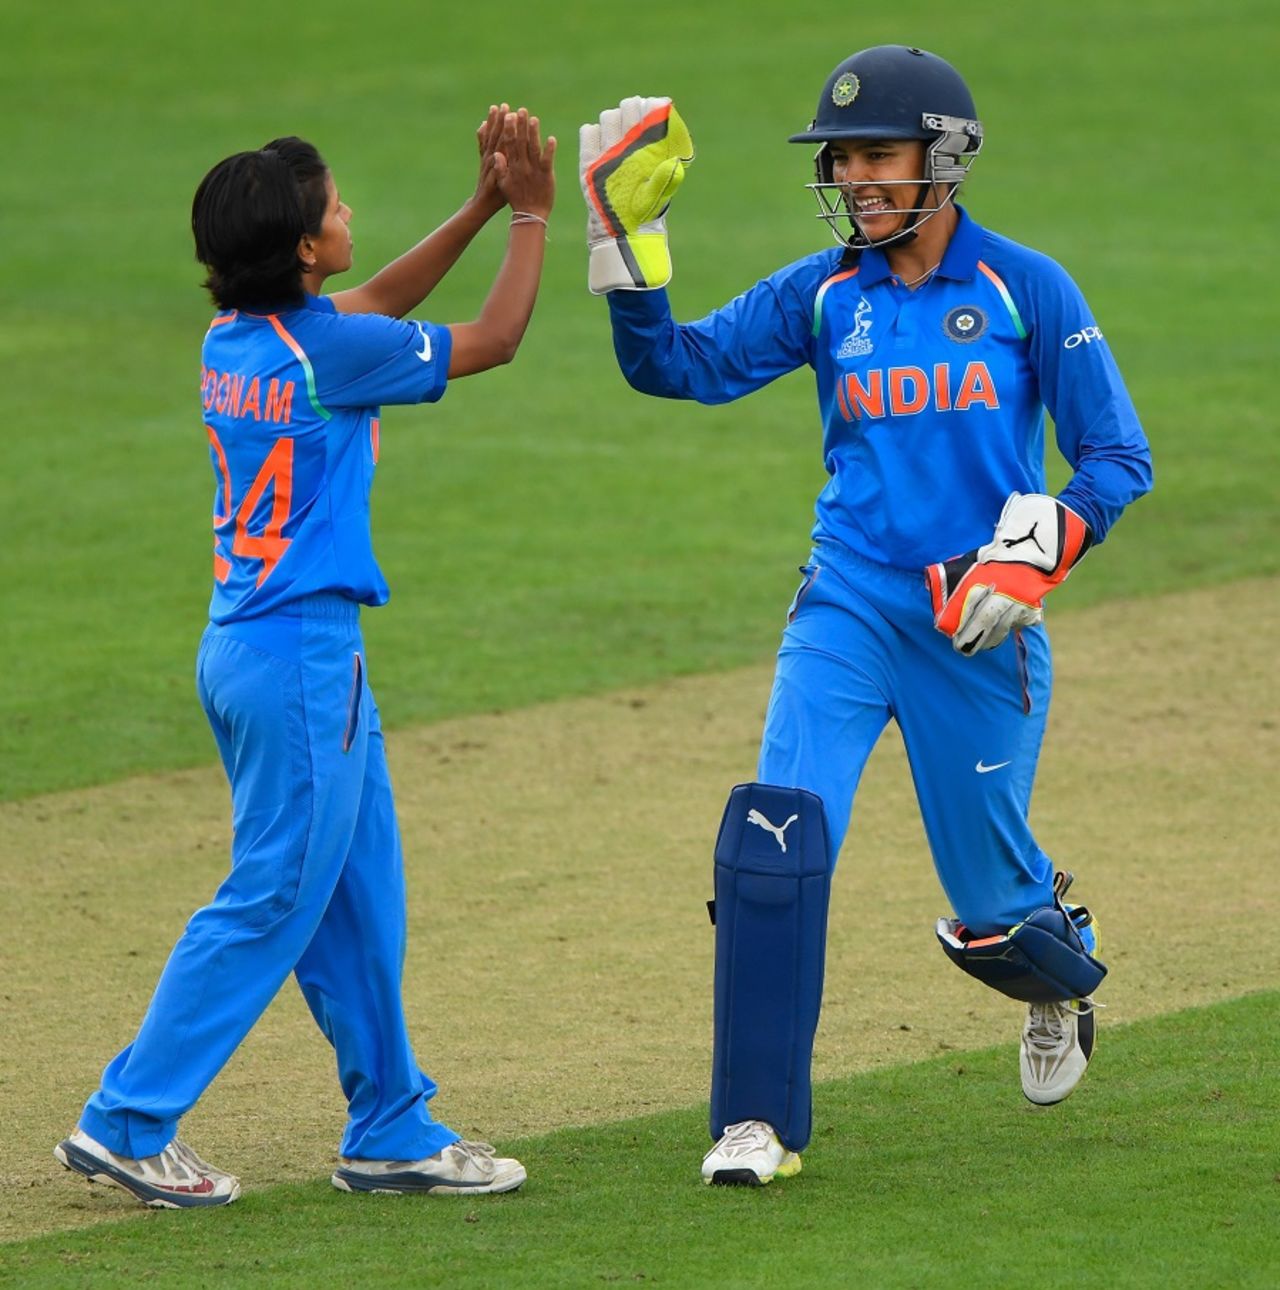 Poonam Yadav and Sushma Verma combined to dismiss Merissa Aguilleira, India v West Indies, Women's World Cup, Taunton, June 29, 2017